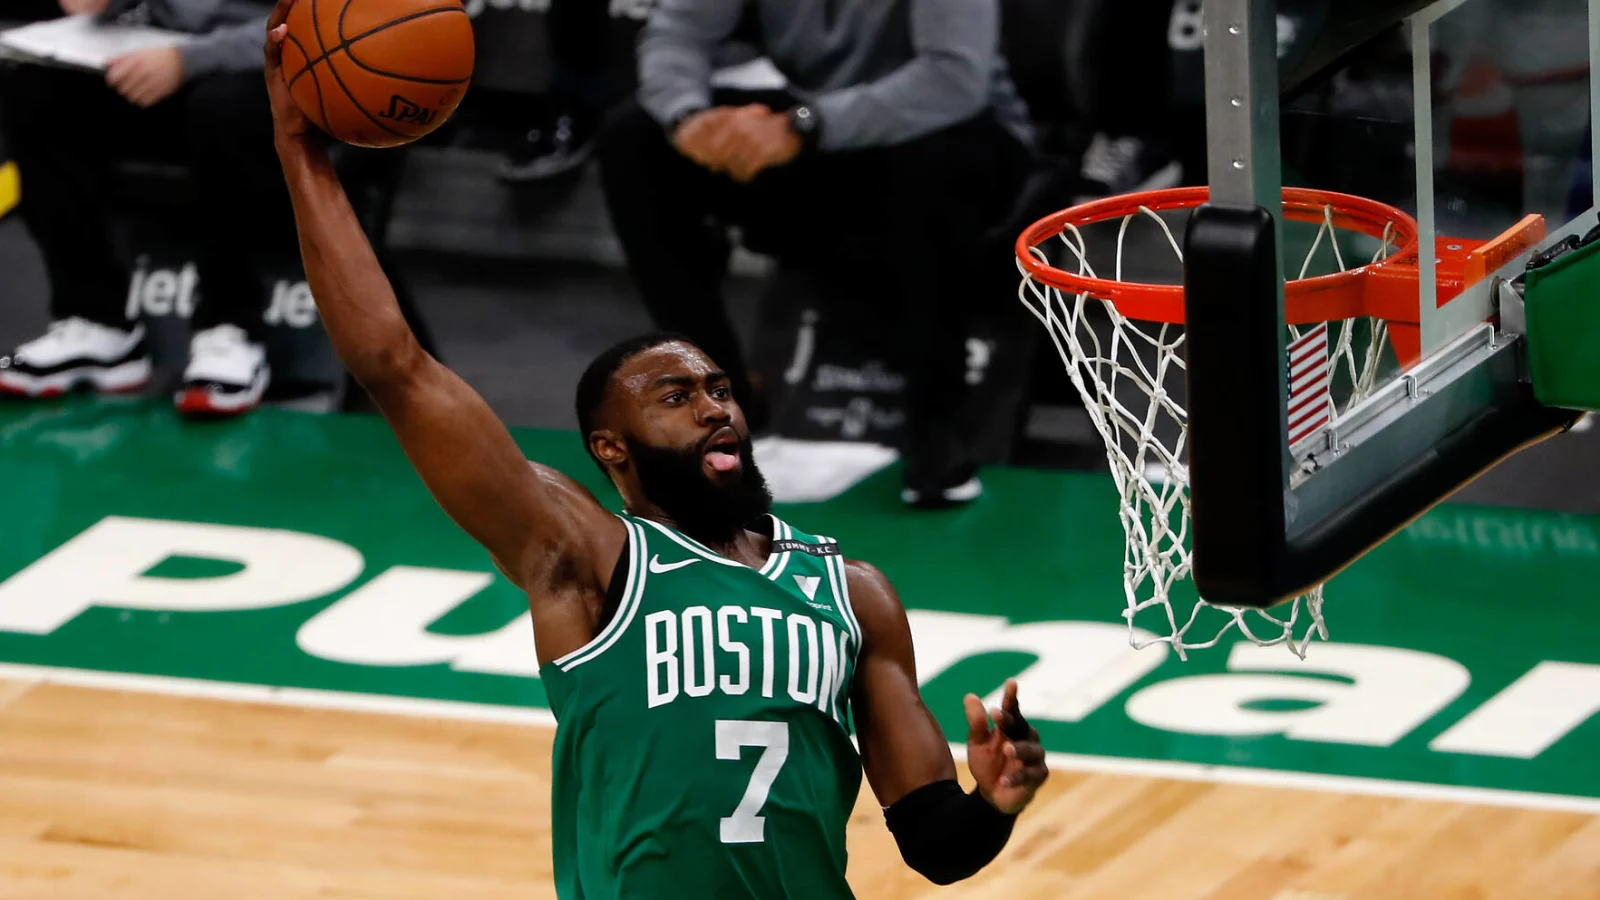 NBA News: "It's Nothing", NBA Legend criticizes Jaylen Brown's Historic $304,000,000 Contract. Does Brown really Deserve such a Hefty Price?